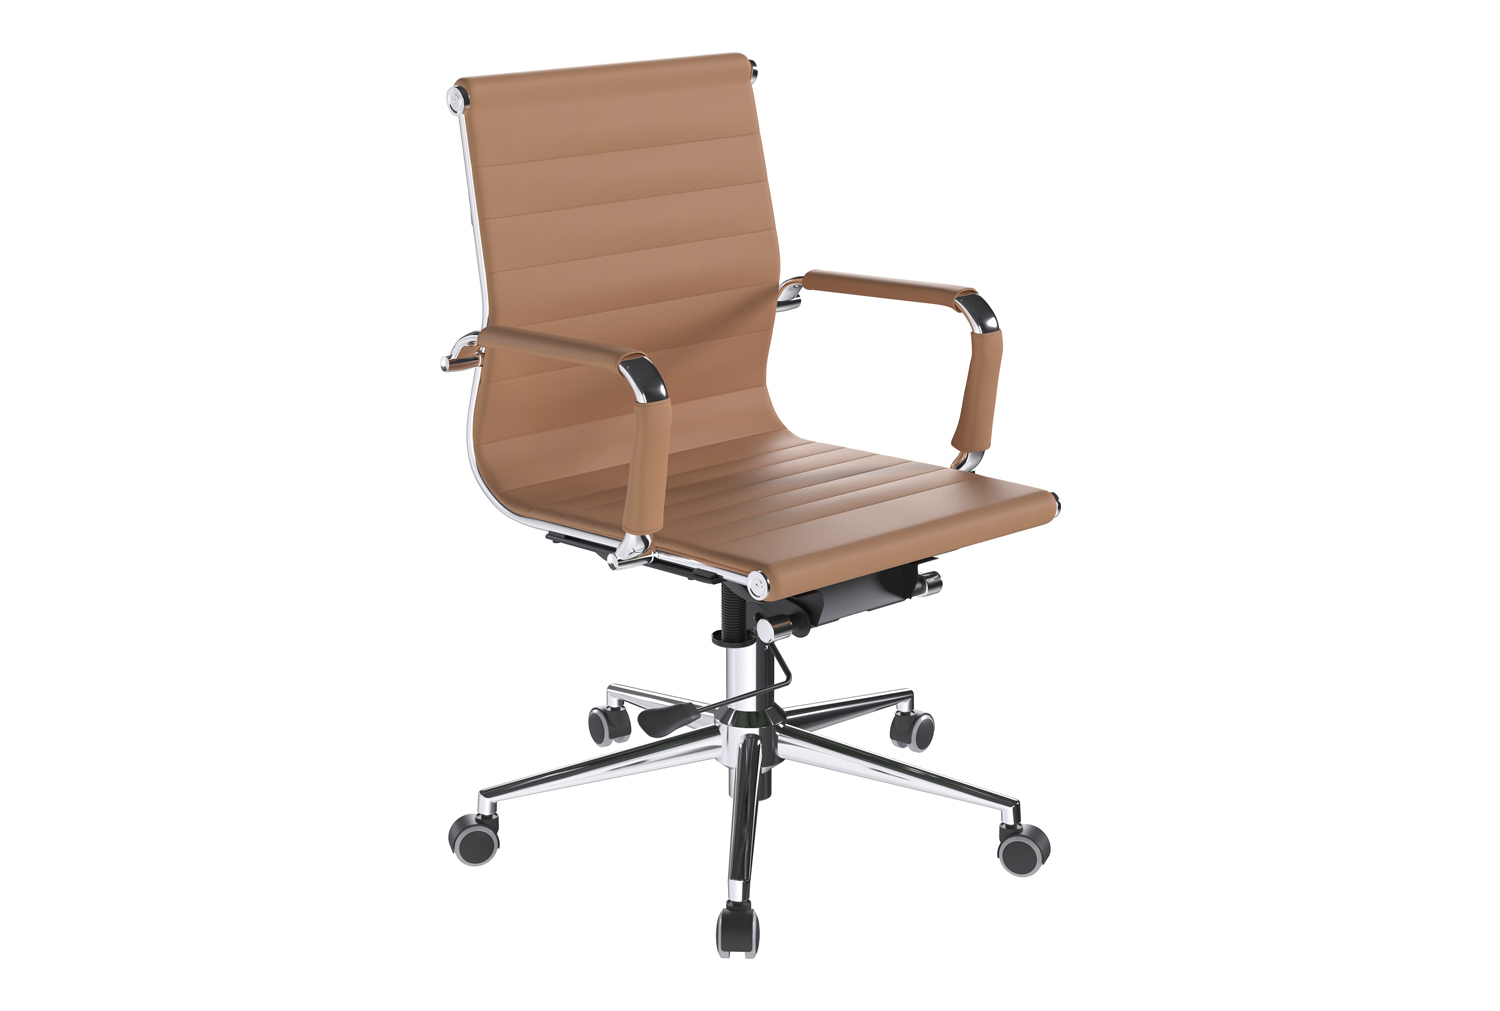 Andruzzi Medium Back Black Bonded Leather Executive Office Chair, Brown, Fully Installed